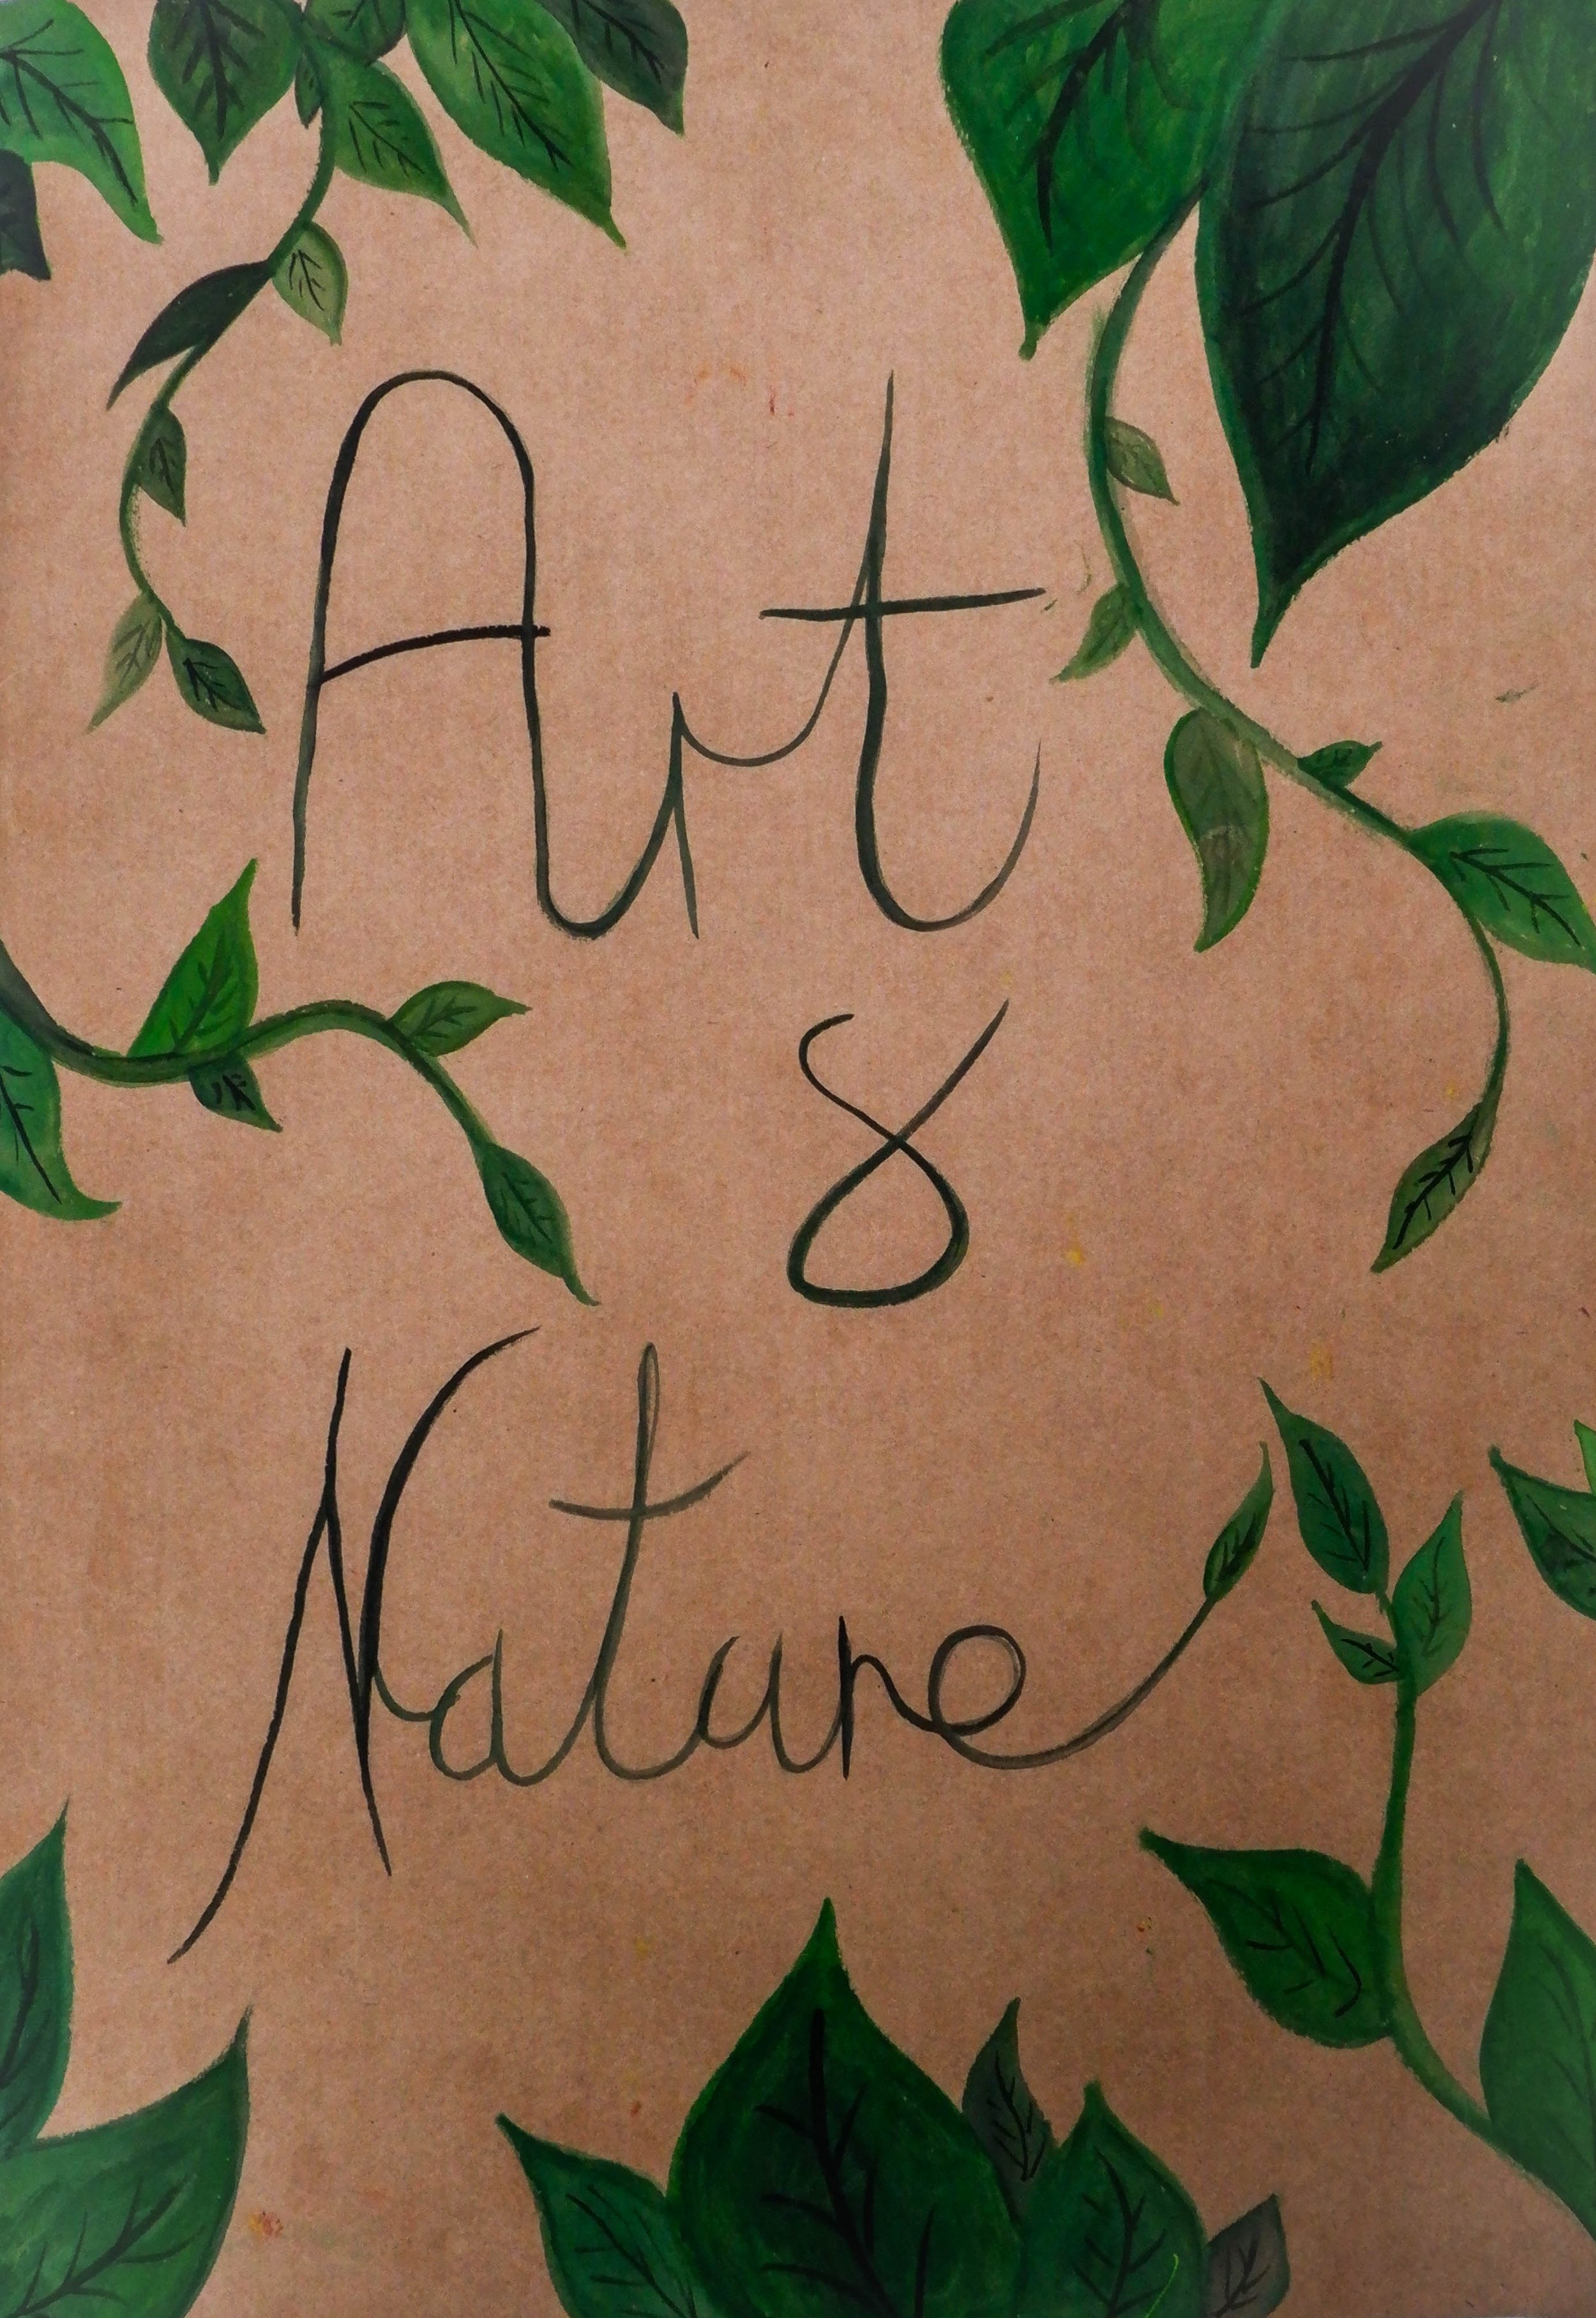 art and nature cropped 1.jpg